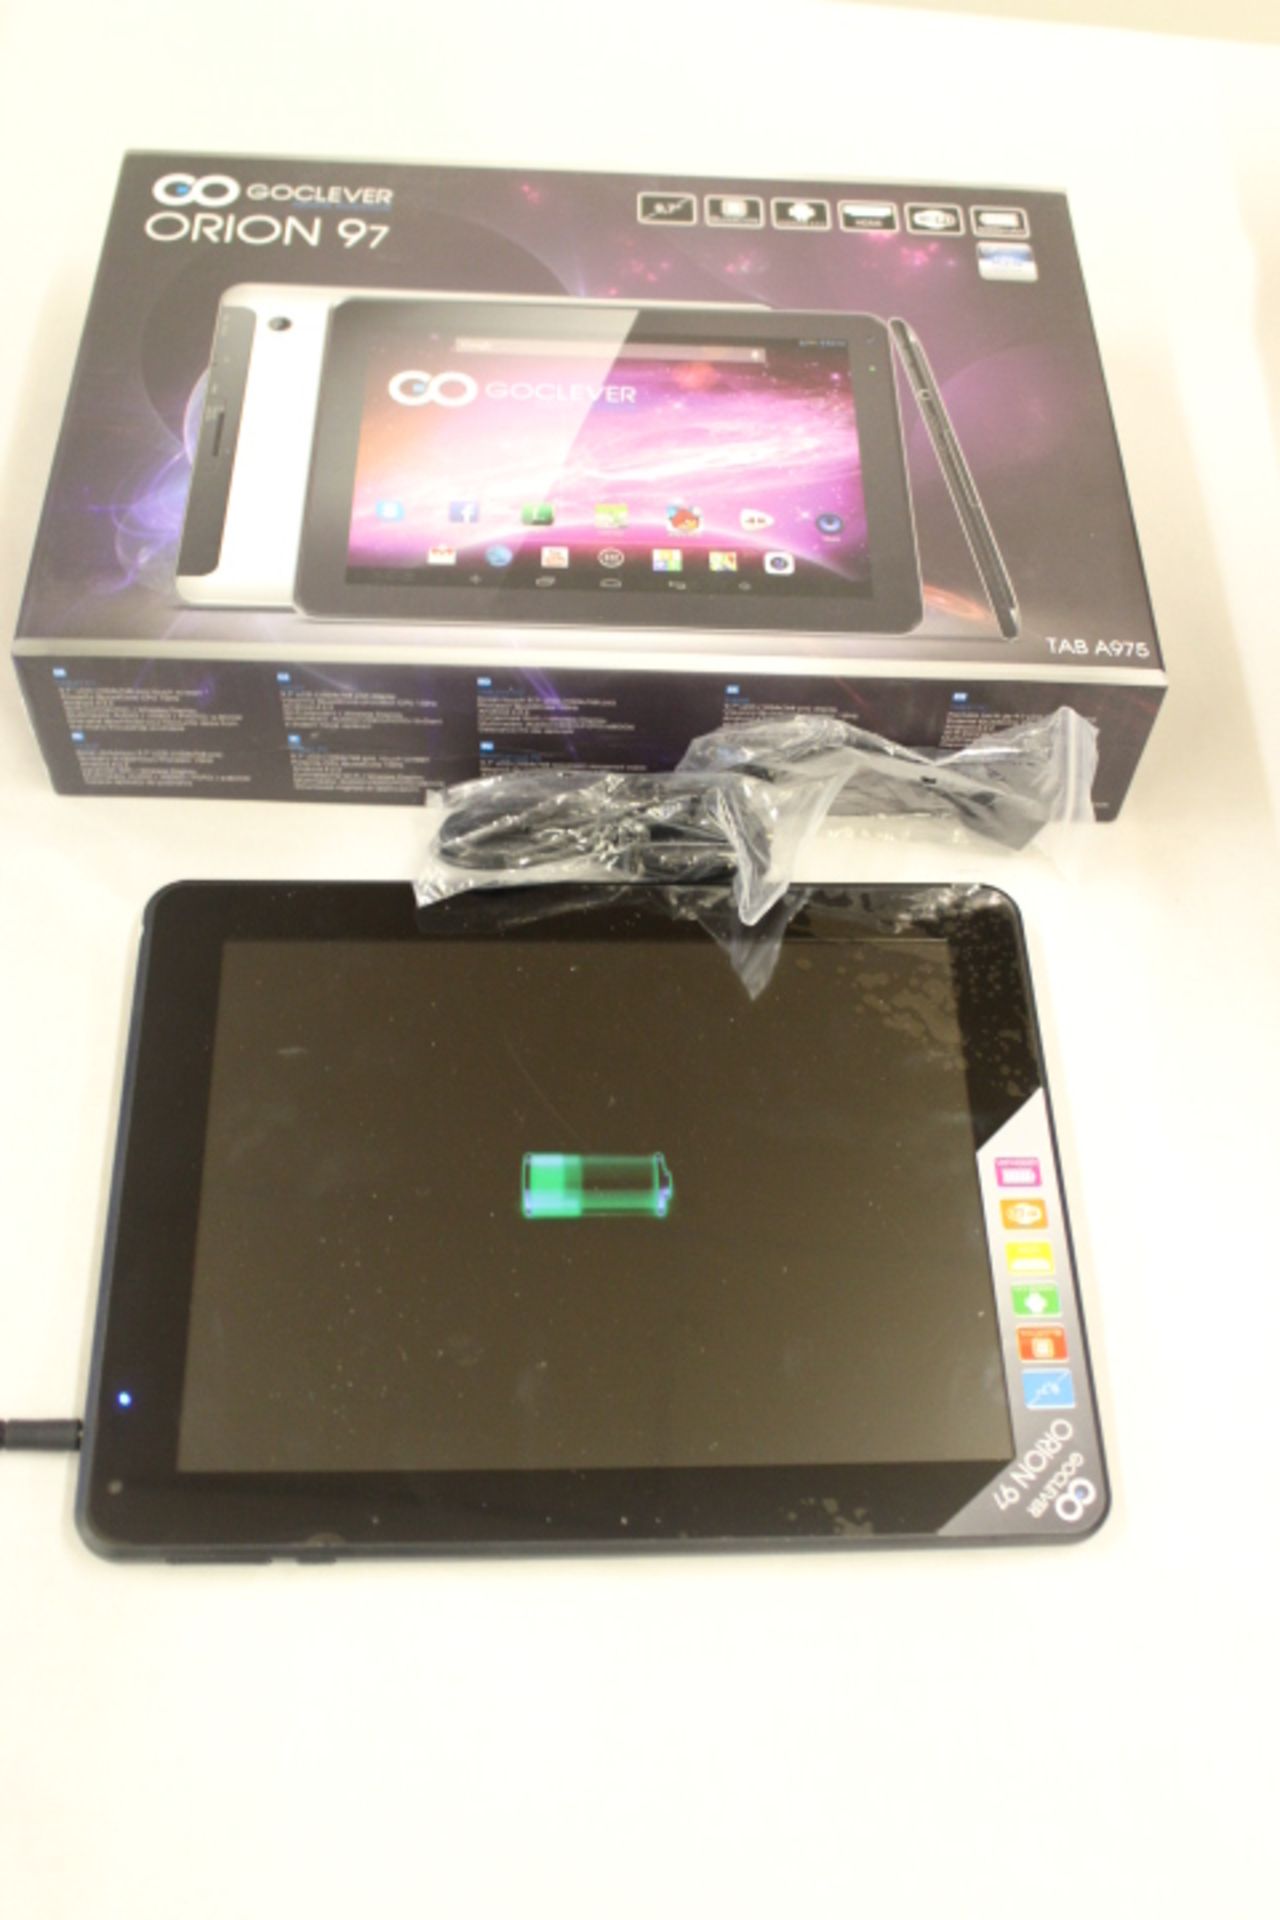 V GOCLEVER 9.7  4:3 Tablet Quad Core JB 4.2 1GB 8GB  2 Cam USB HDMI SD - RRP £119 - Item Is A 14 DAY